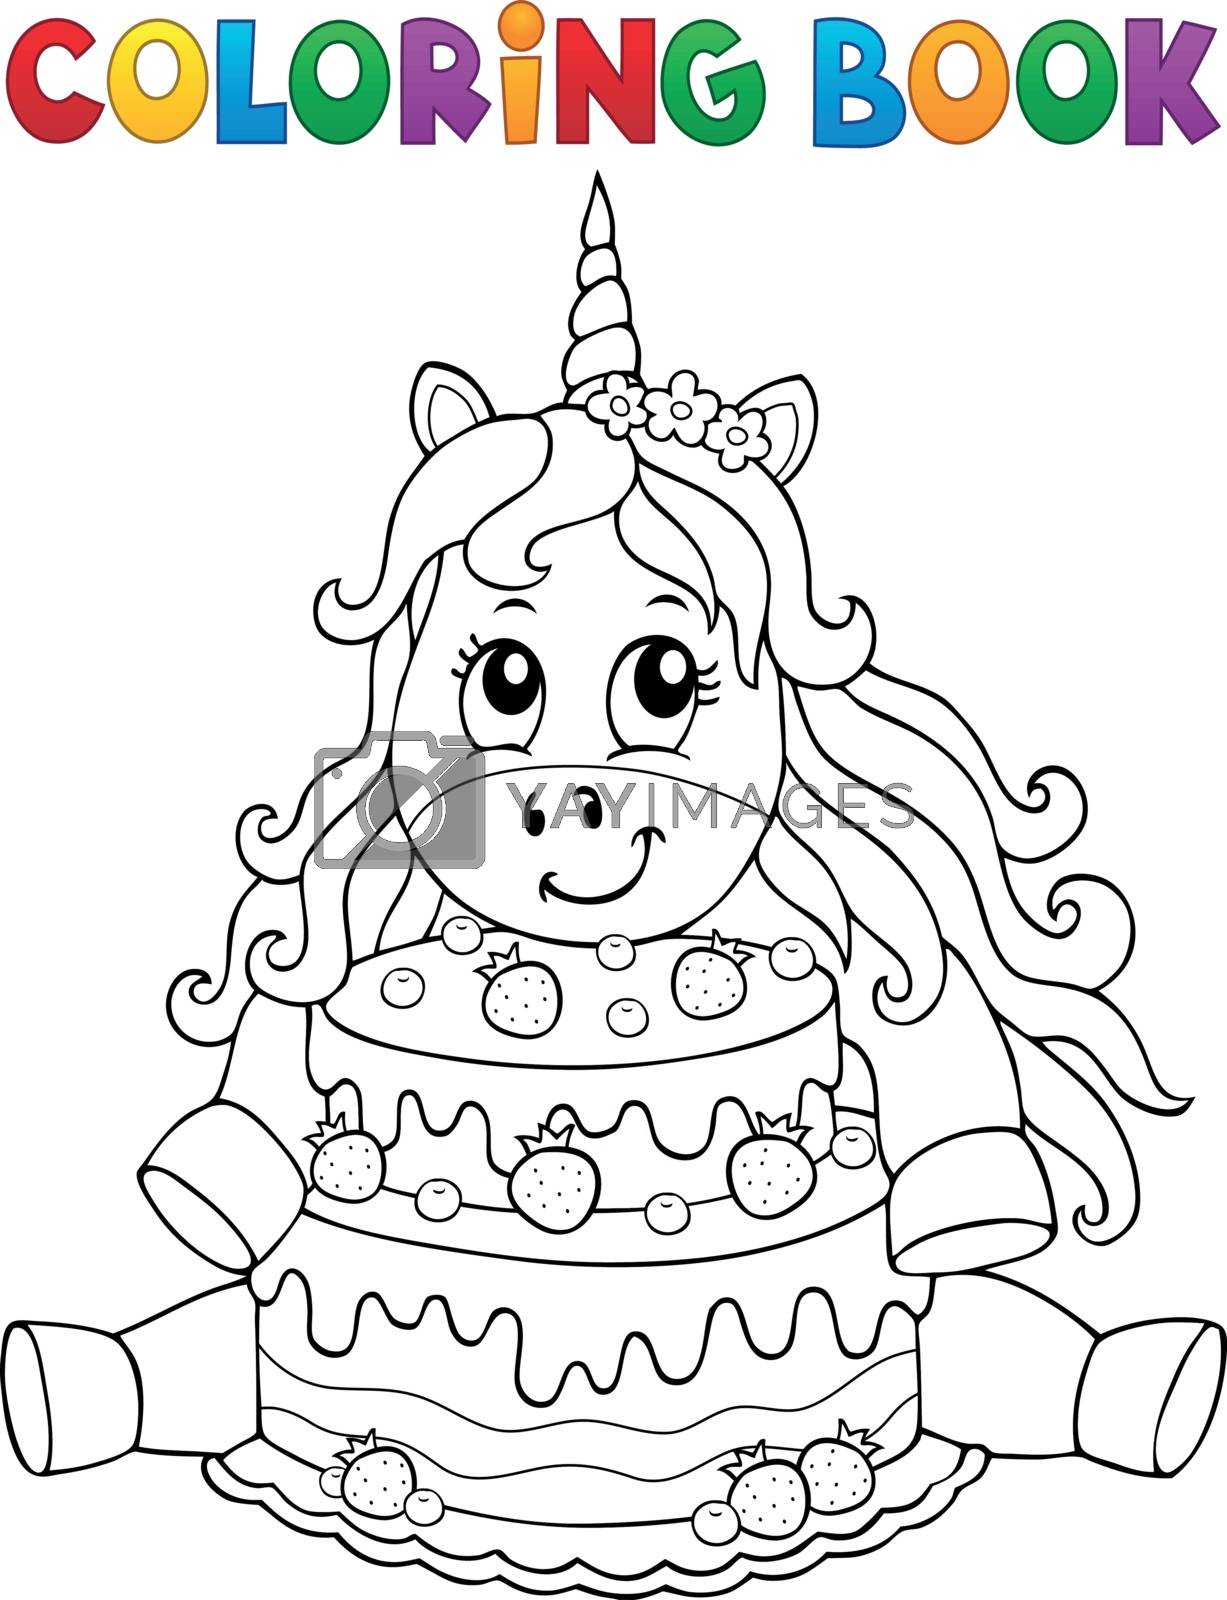 Royalty free image of Coloring book unicorn with cake 1 by clairev